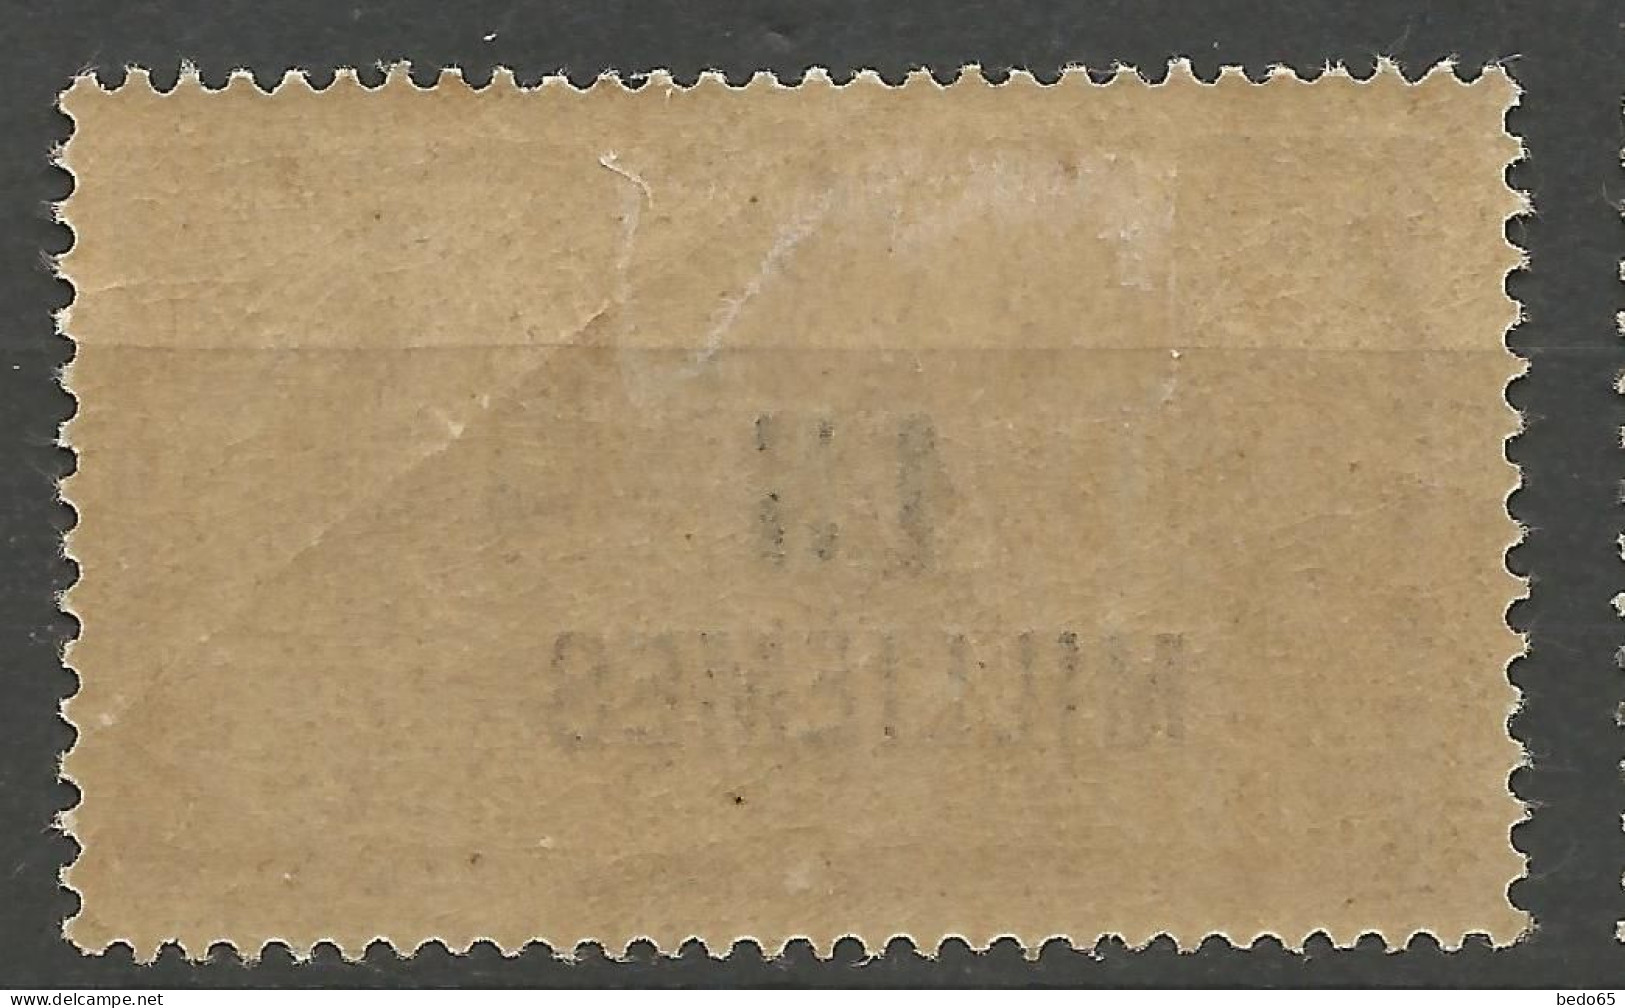 ALEXANDRIE N° 57 NEUF* TRACE DE CHARNIERE  / Hinge / MH - Unused Stamps